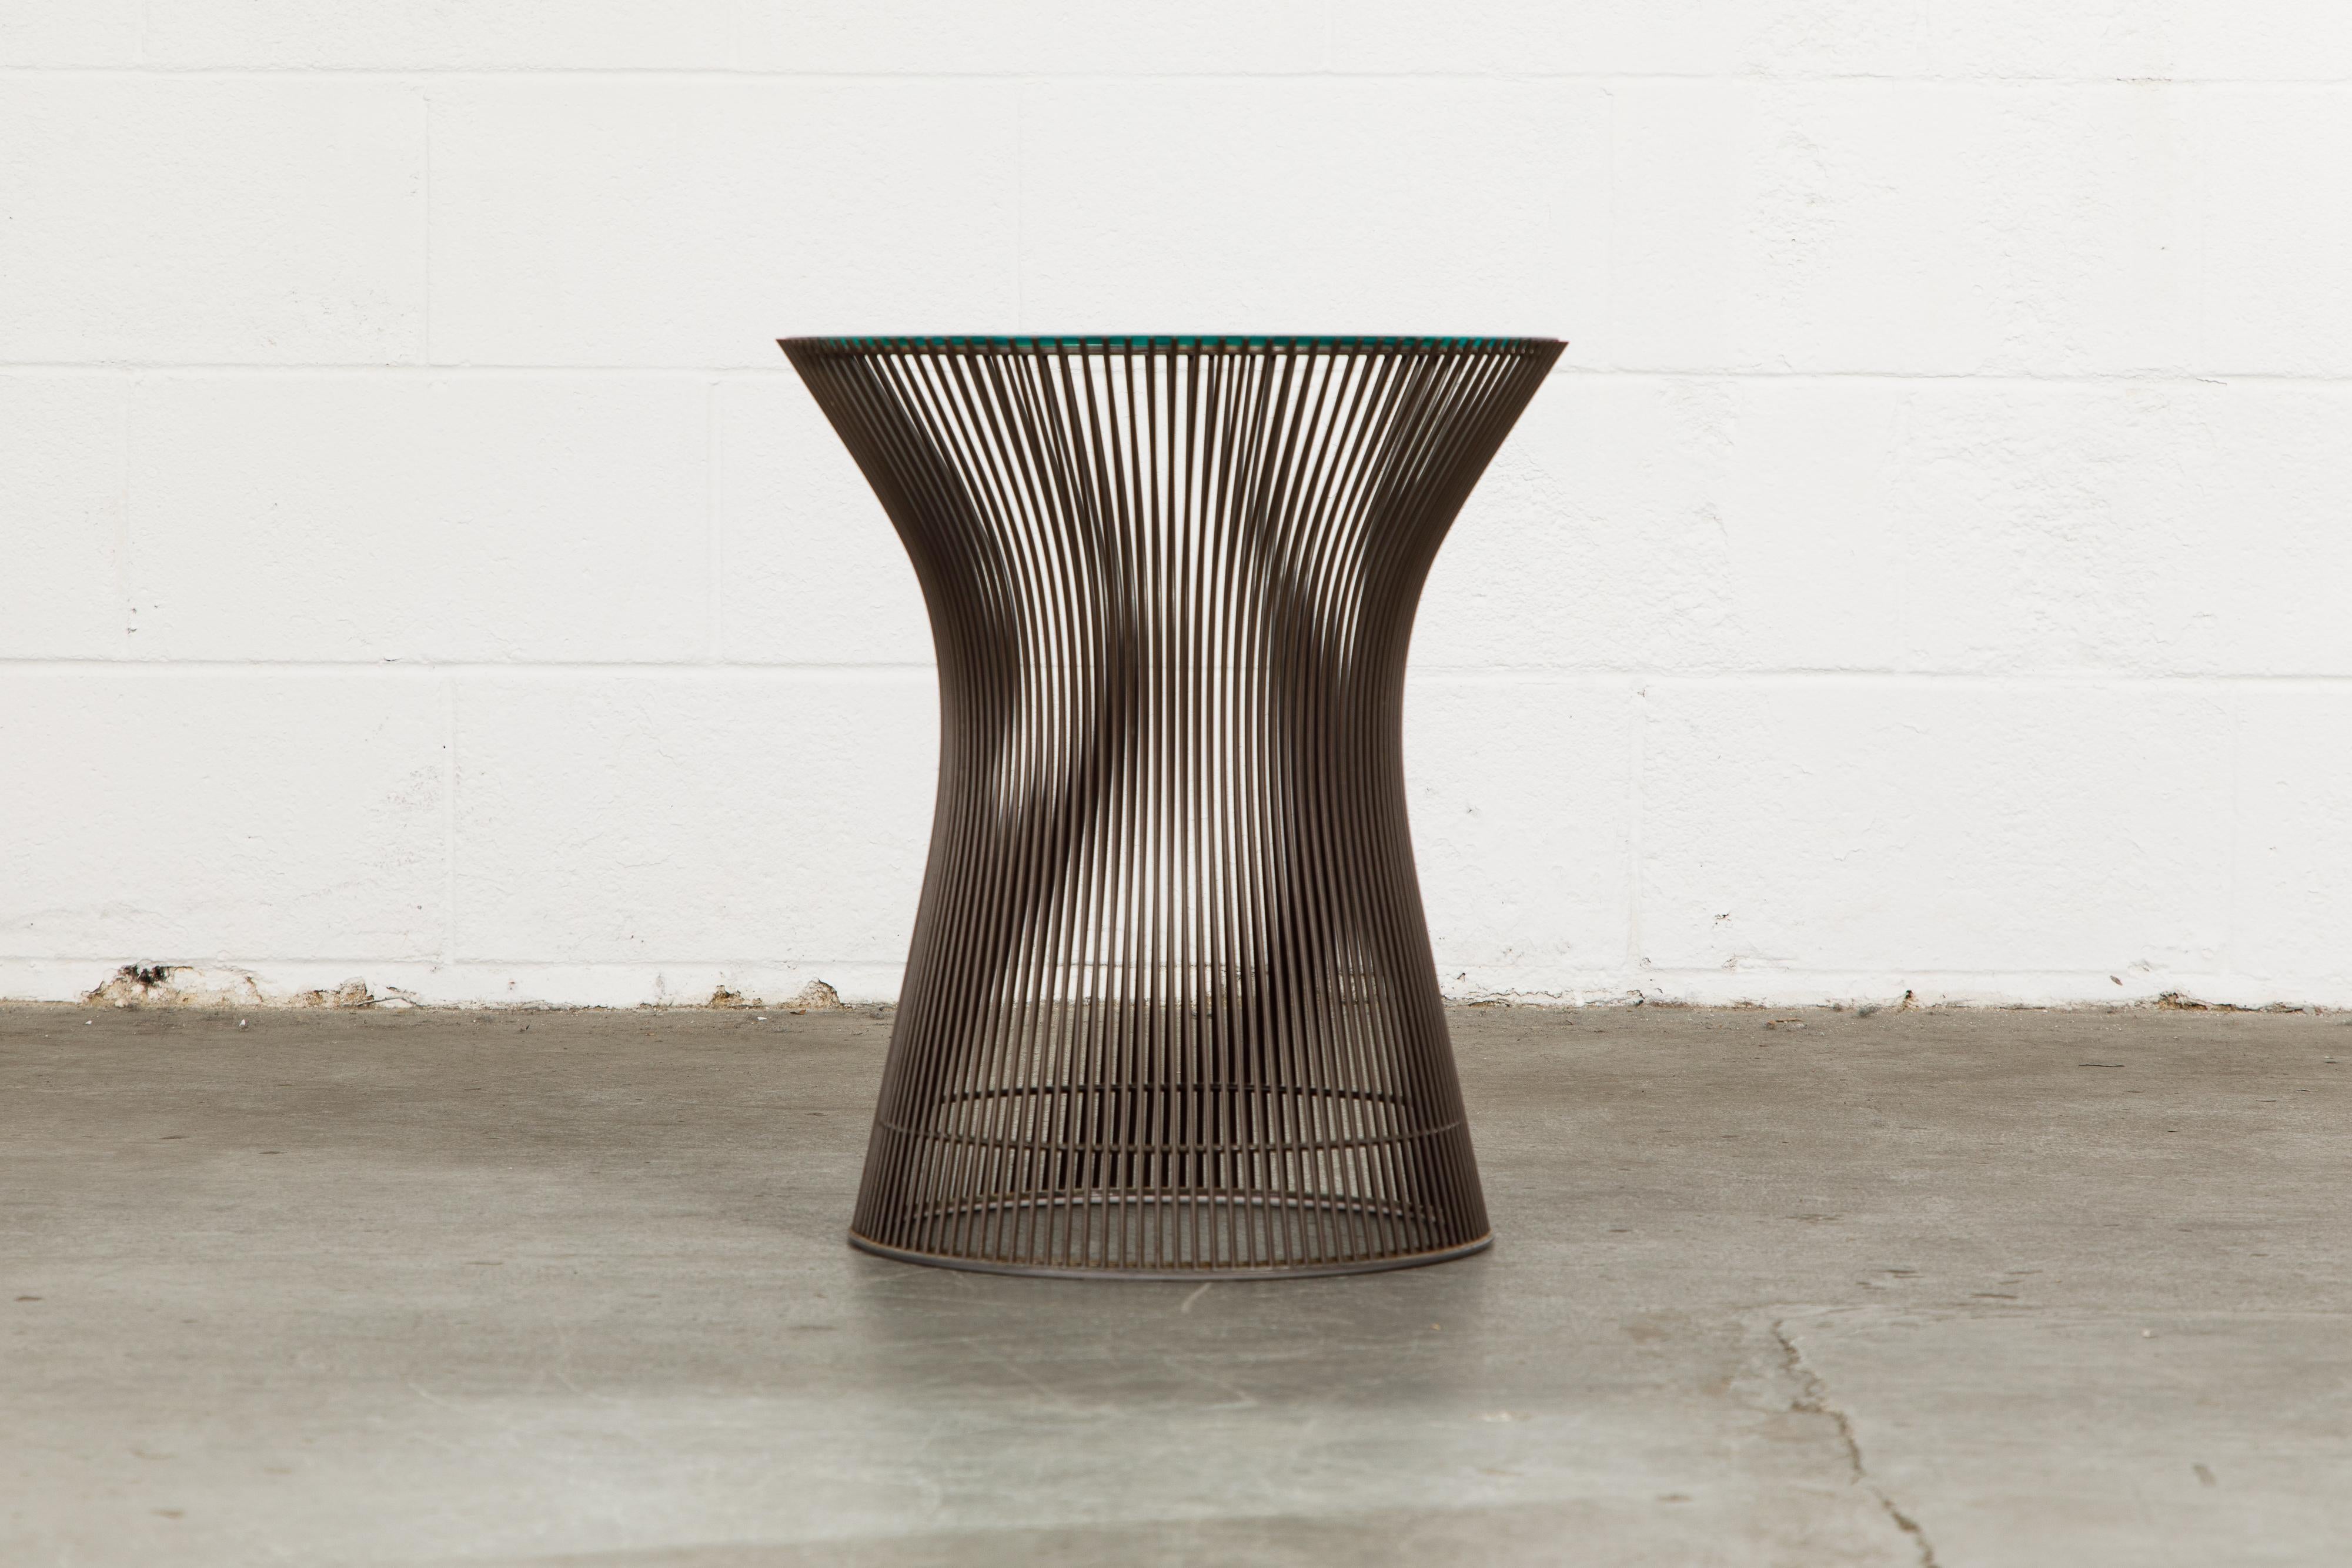 A beautiful original production bronze side table by Warren Platner for Knoll International, designed in 1966 and this example produced during the original production years of this design, circa 1968. This example is in excellent vintage condition